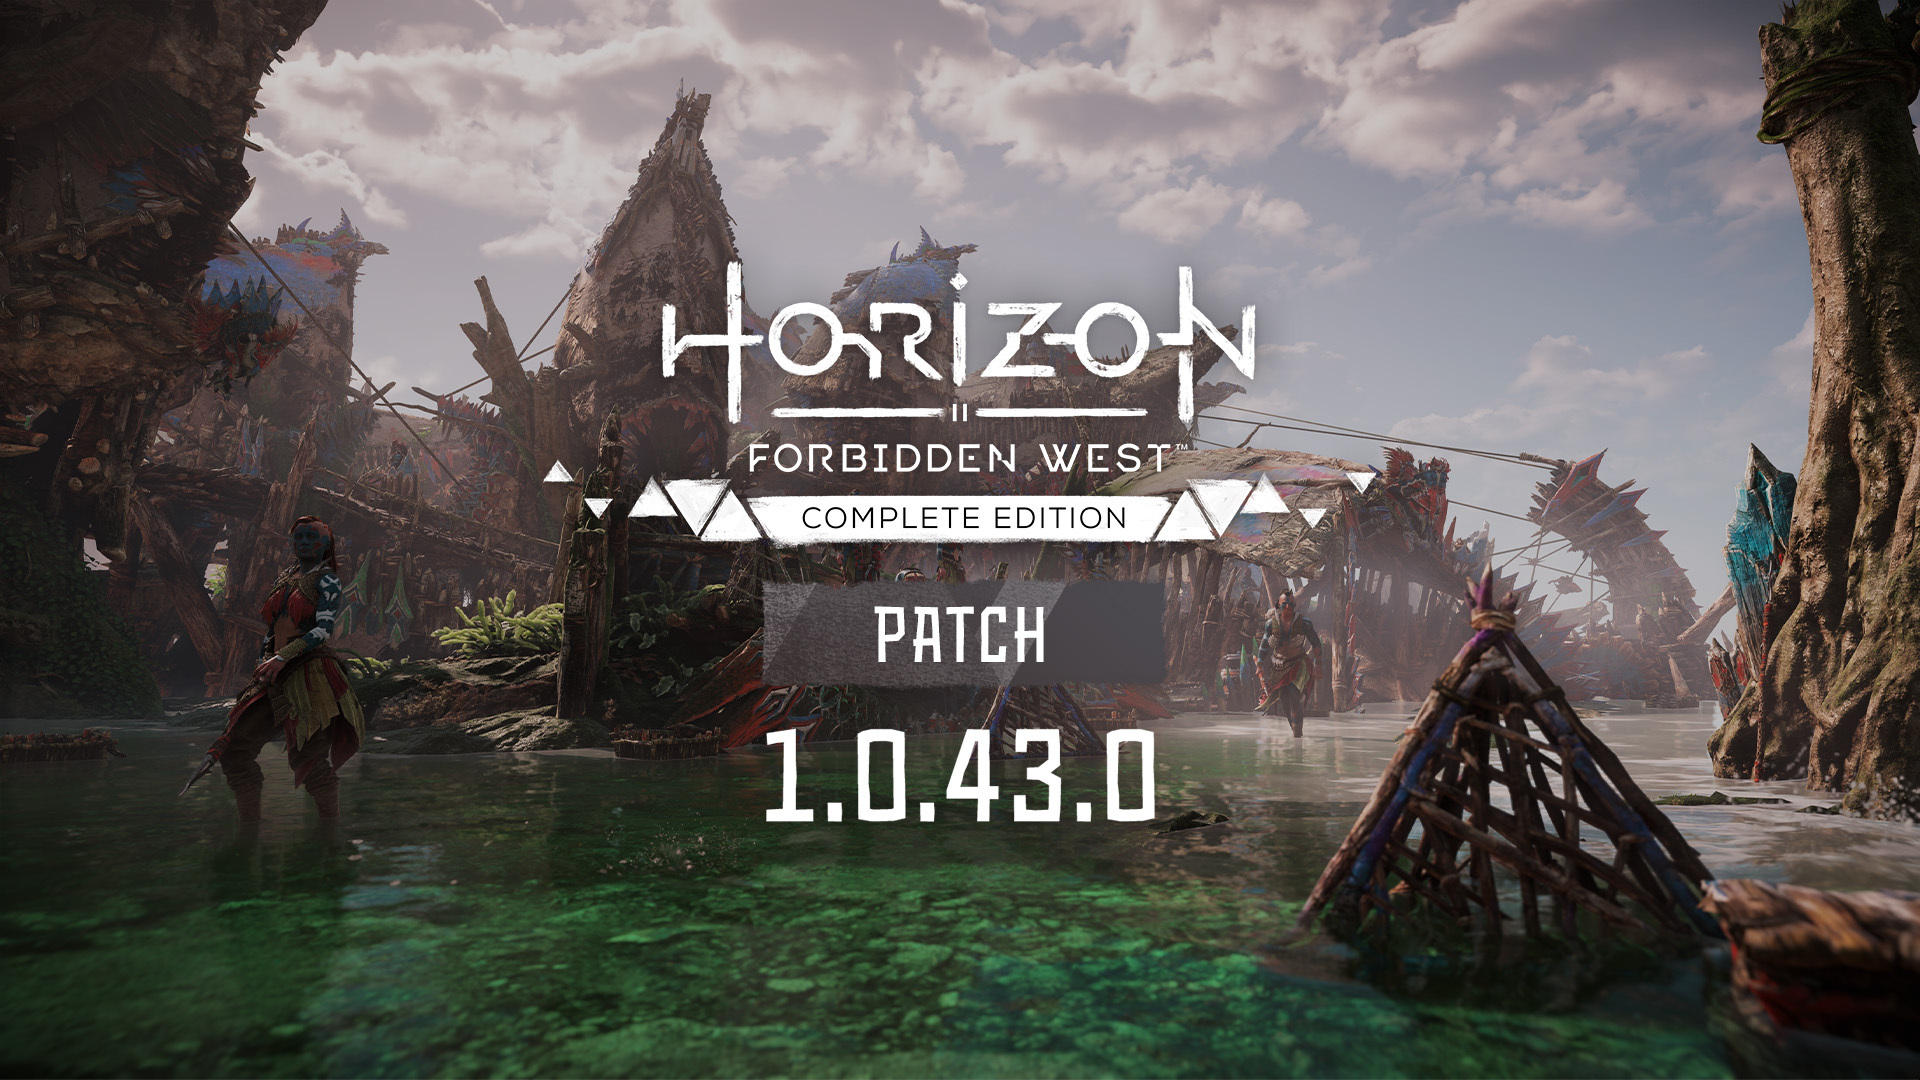 Horizon: Forbidden West has received its first major PC patch